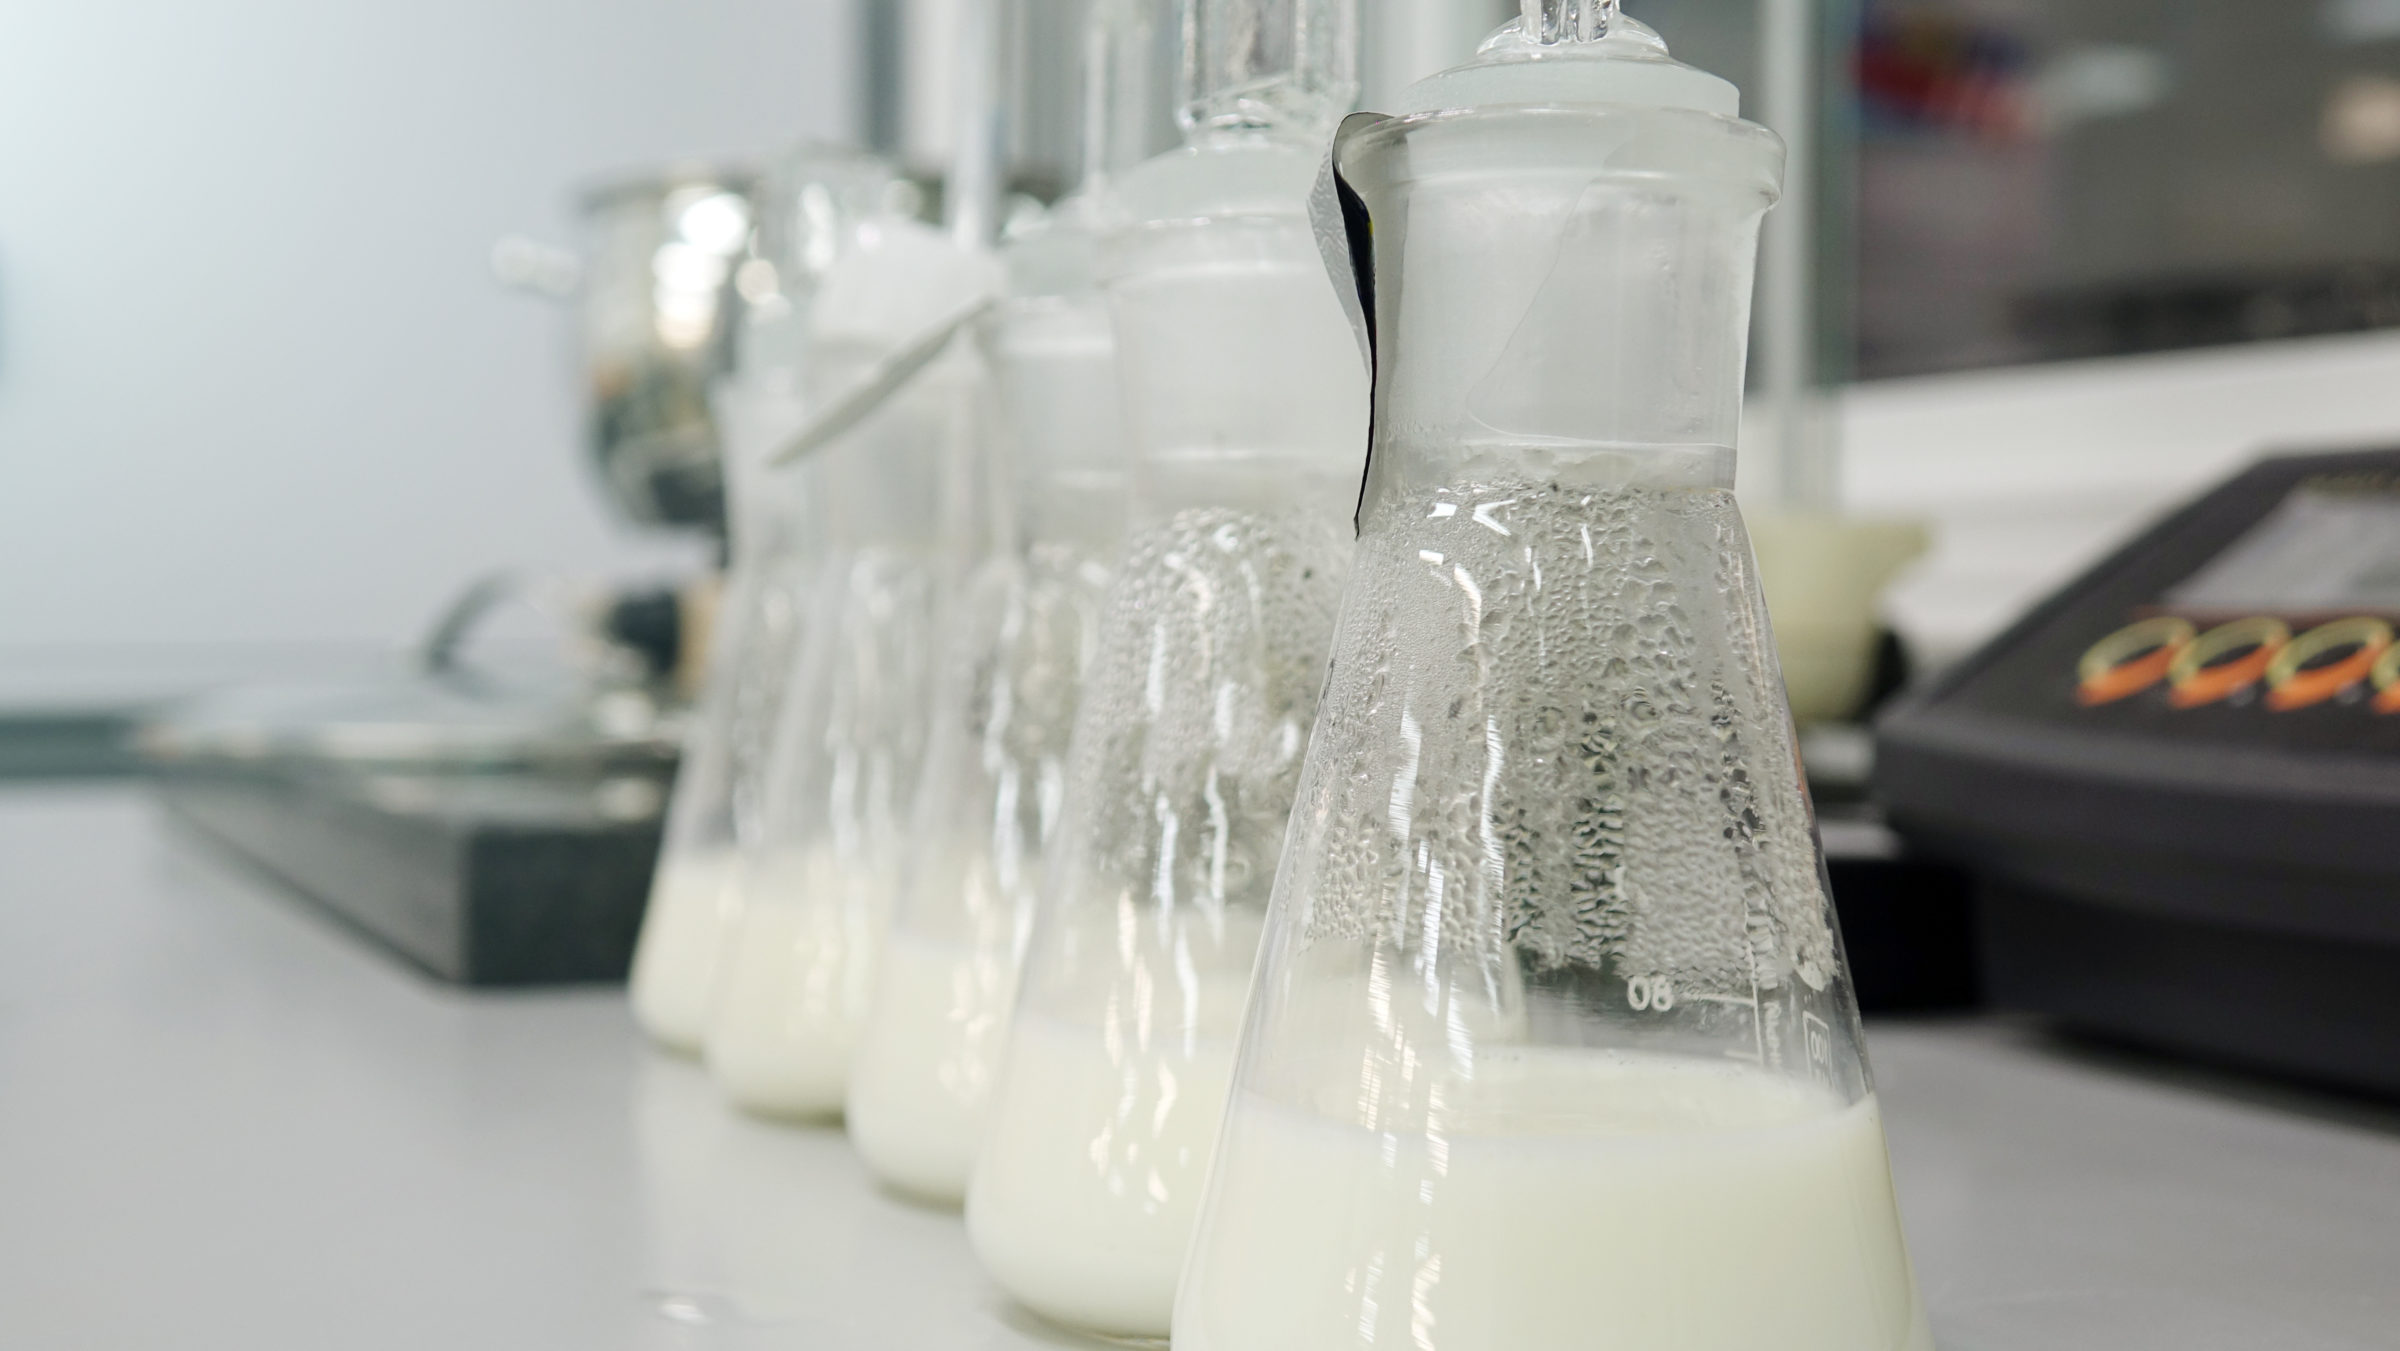 samples of dairy products in the laboratory.